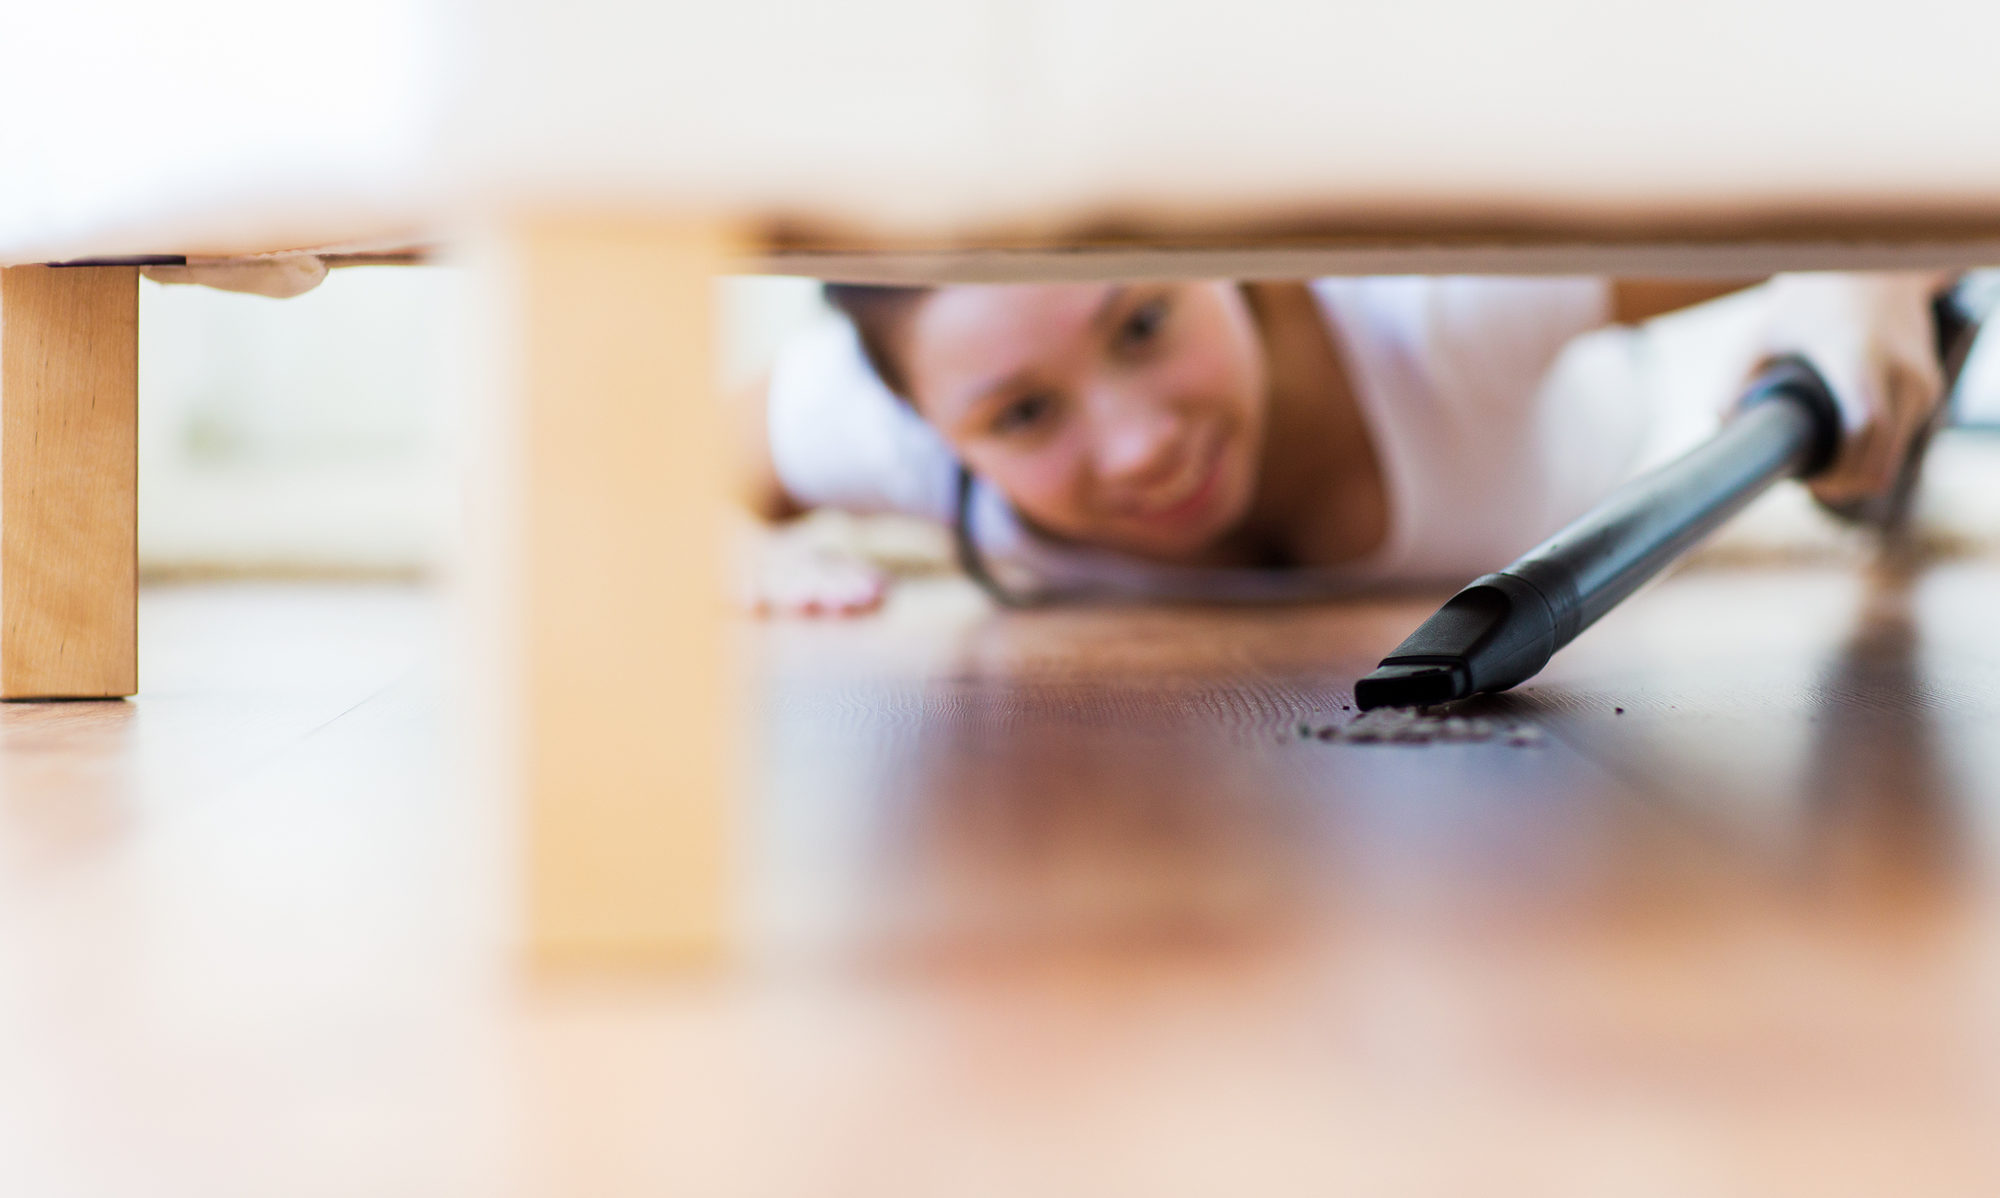 Blurred woman in background lies on floor and extends vacuum wand under furniture to pick up dust and debris